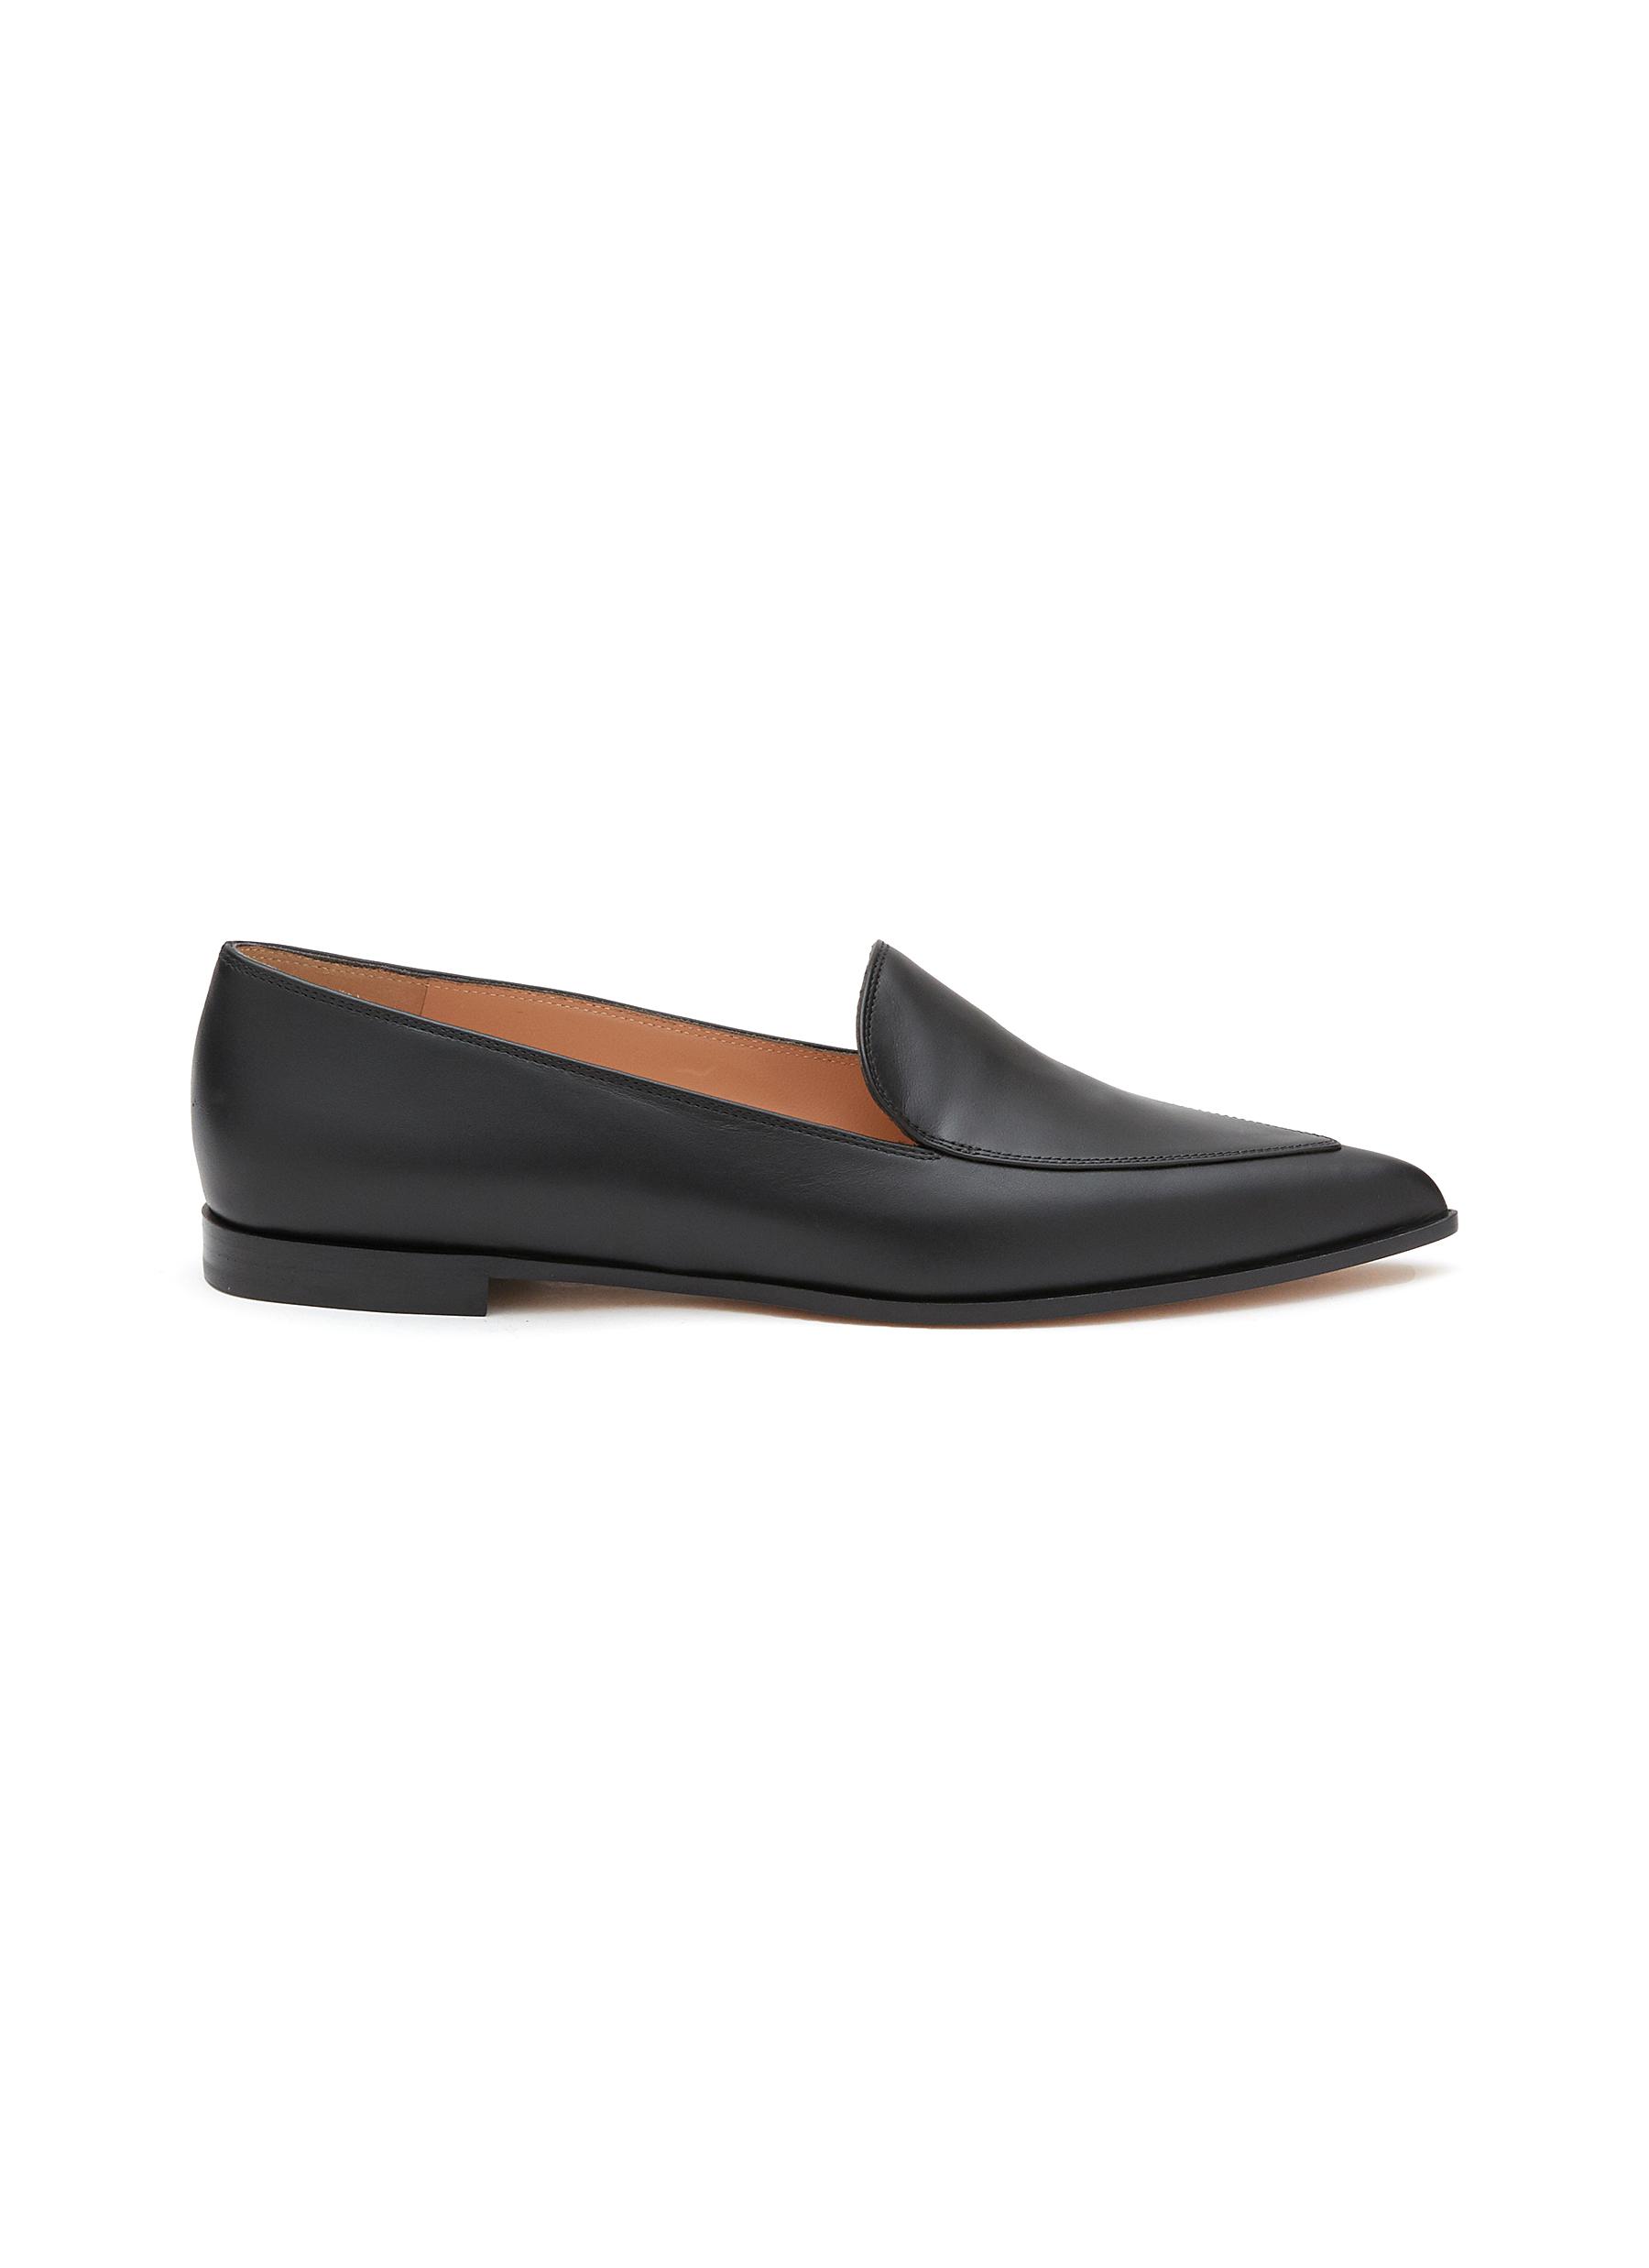 GIANVITO ROSSI HIGH VAMP LEATHER LOAFERS